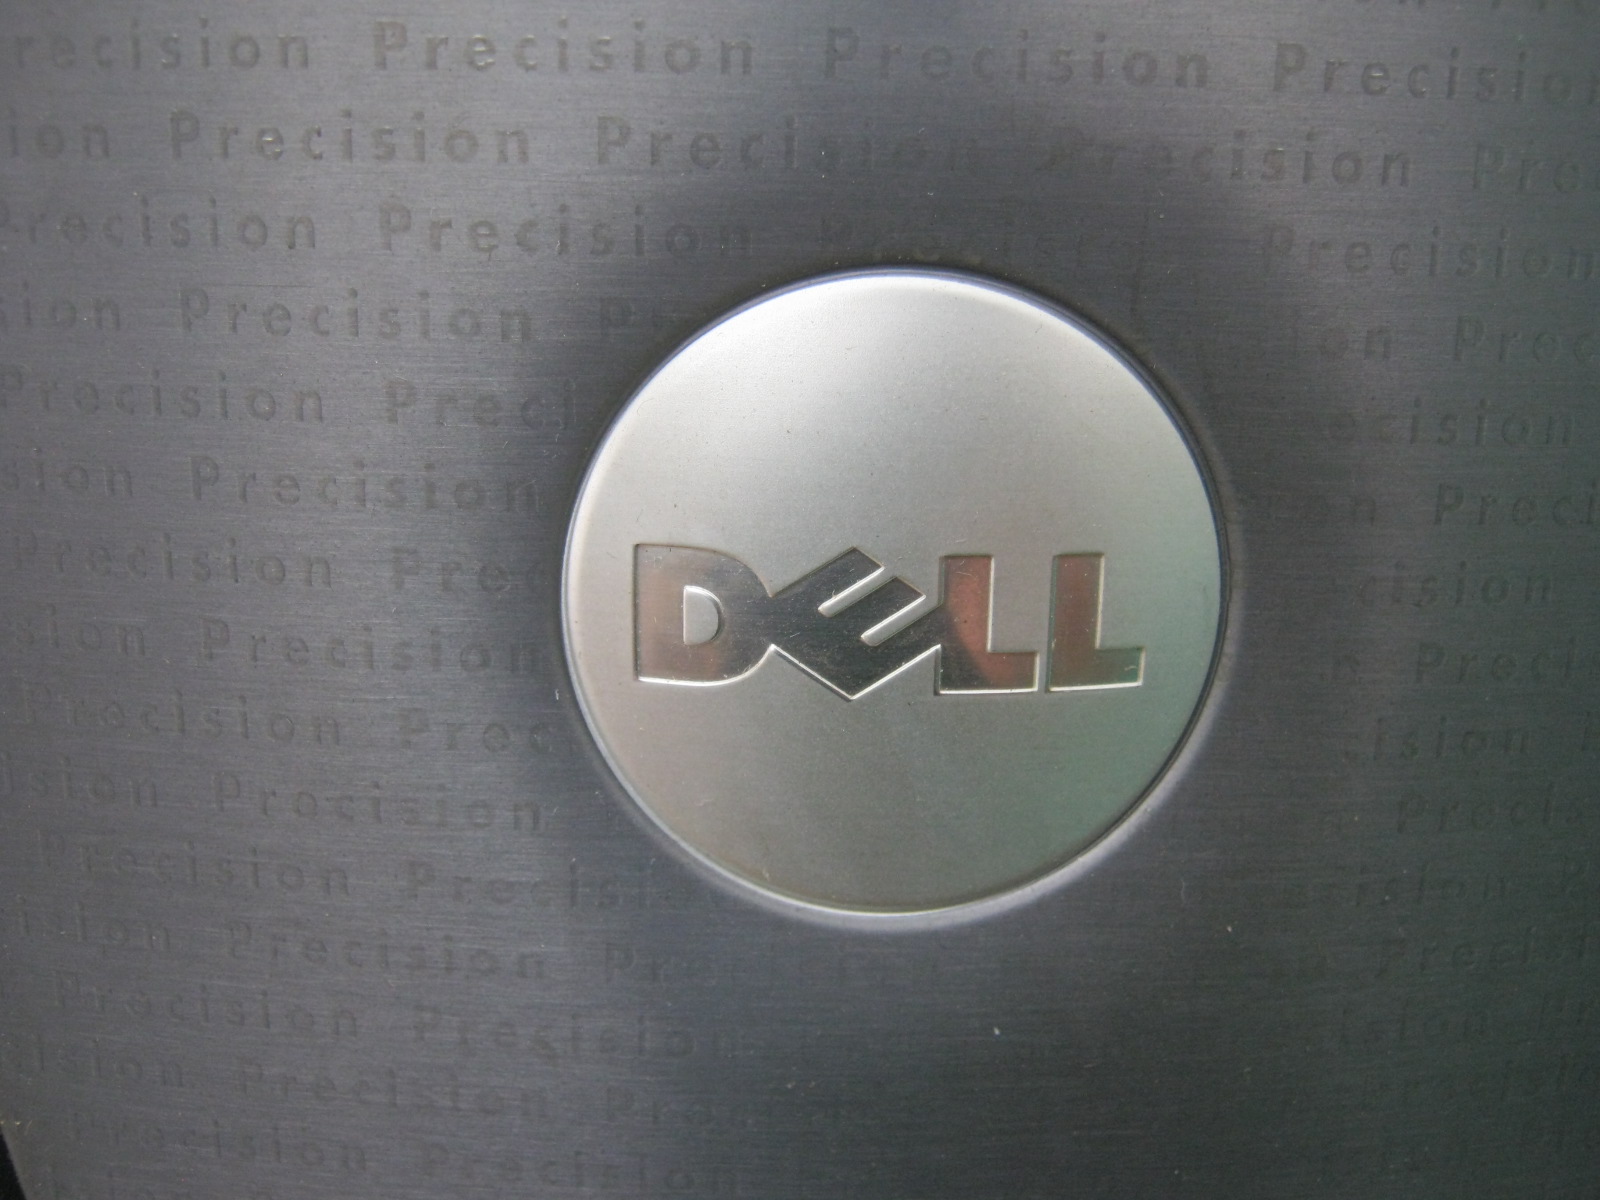 http://museodelcomputer.org/parts/d/dell/precision530/IMG_5630.JPG